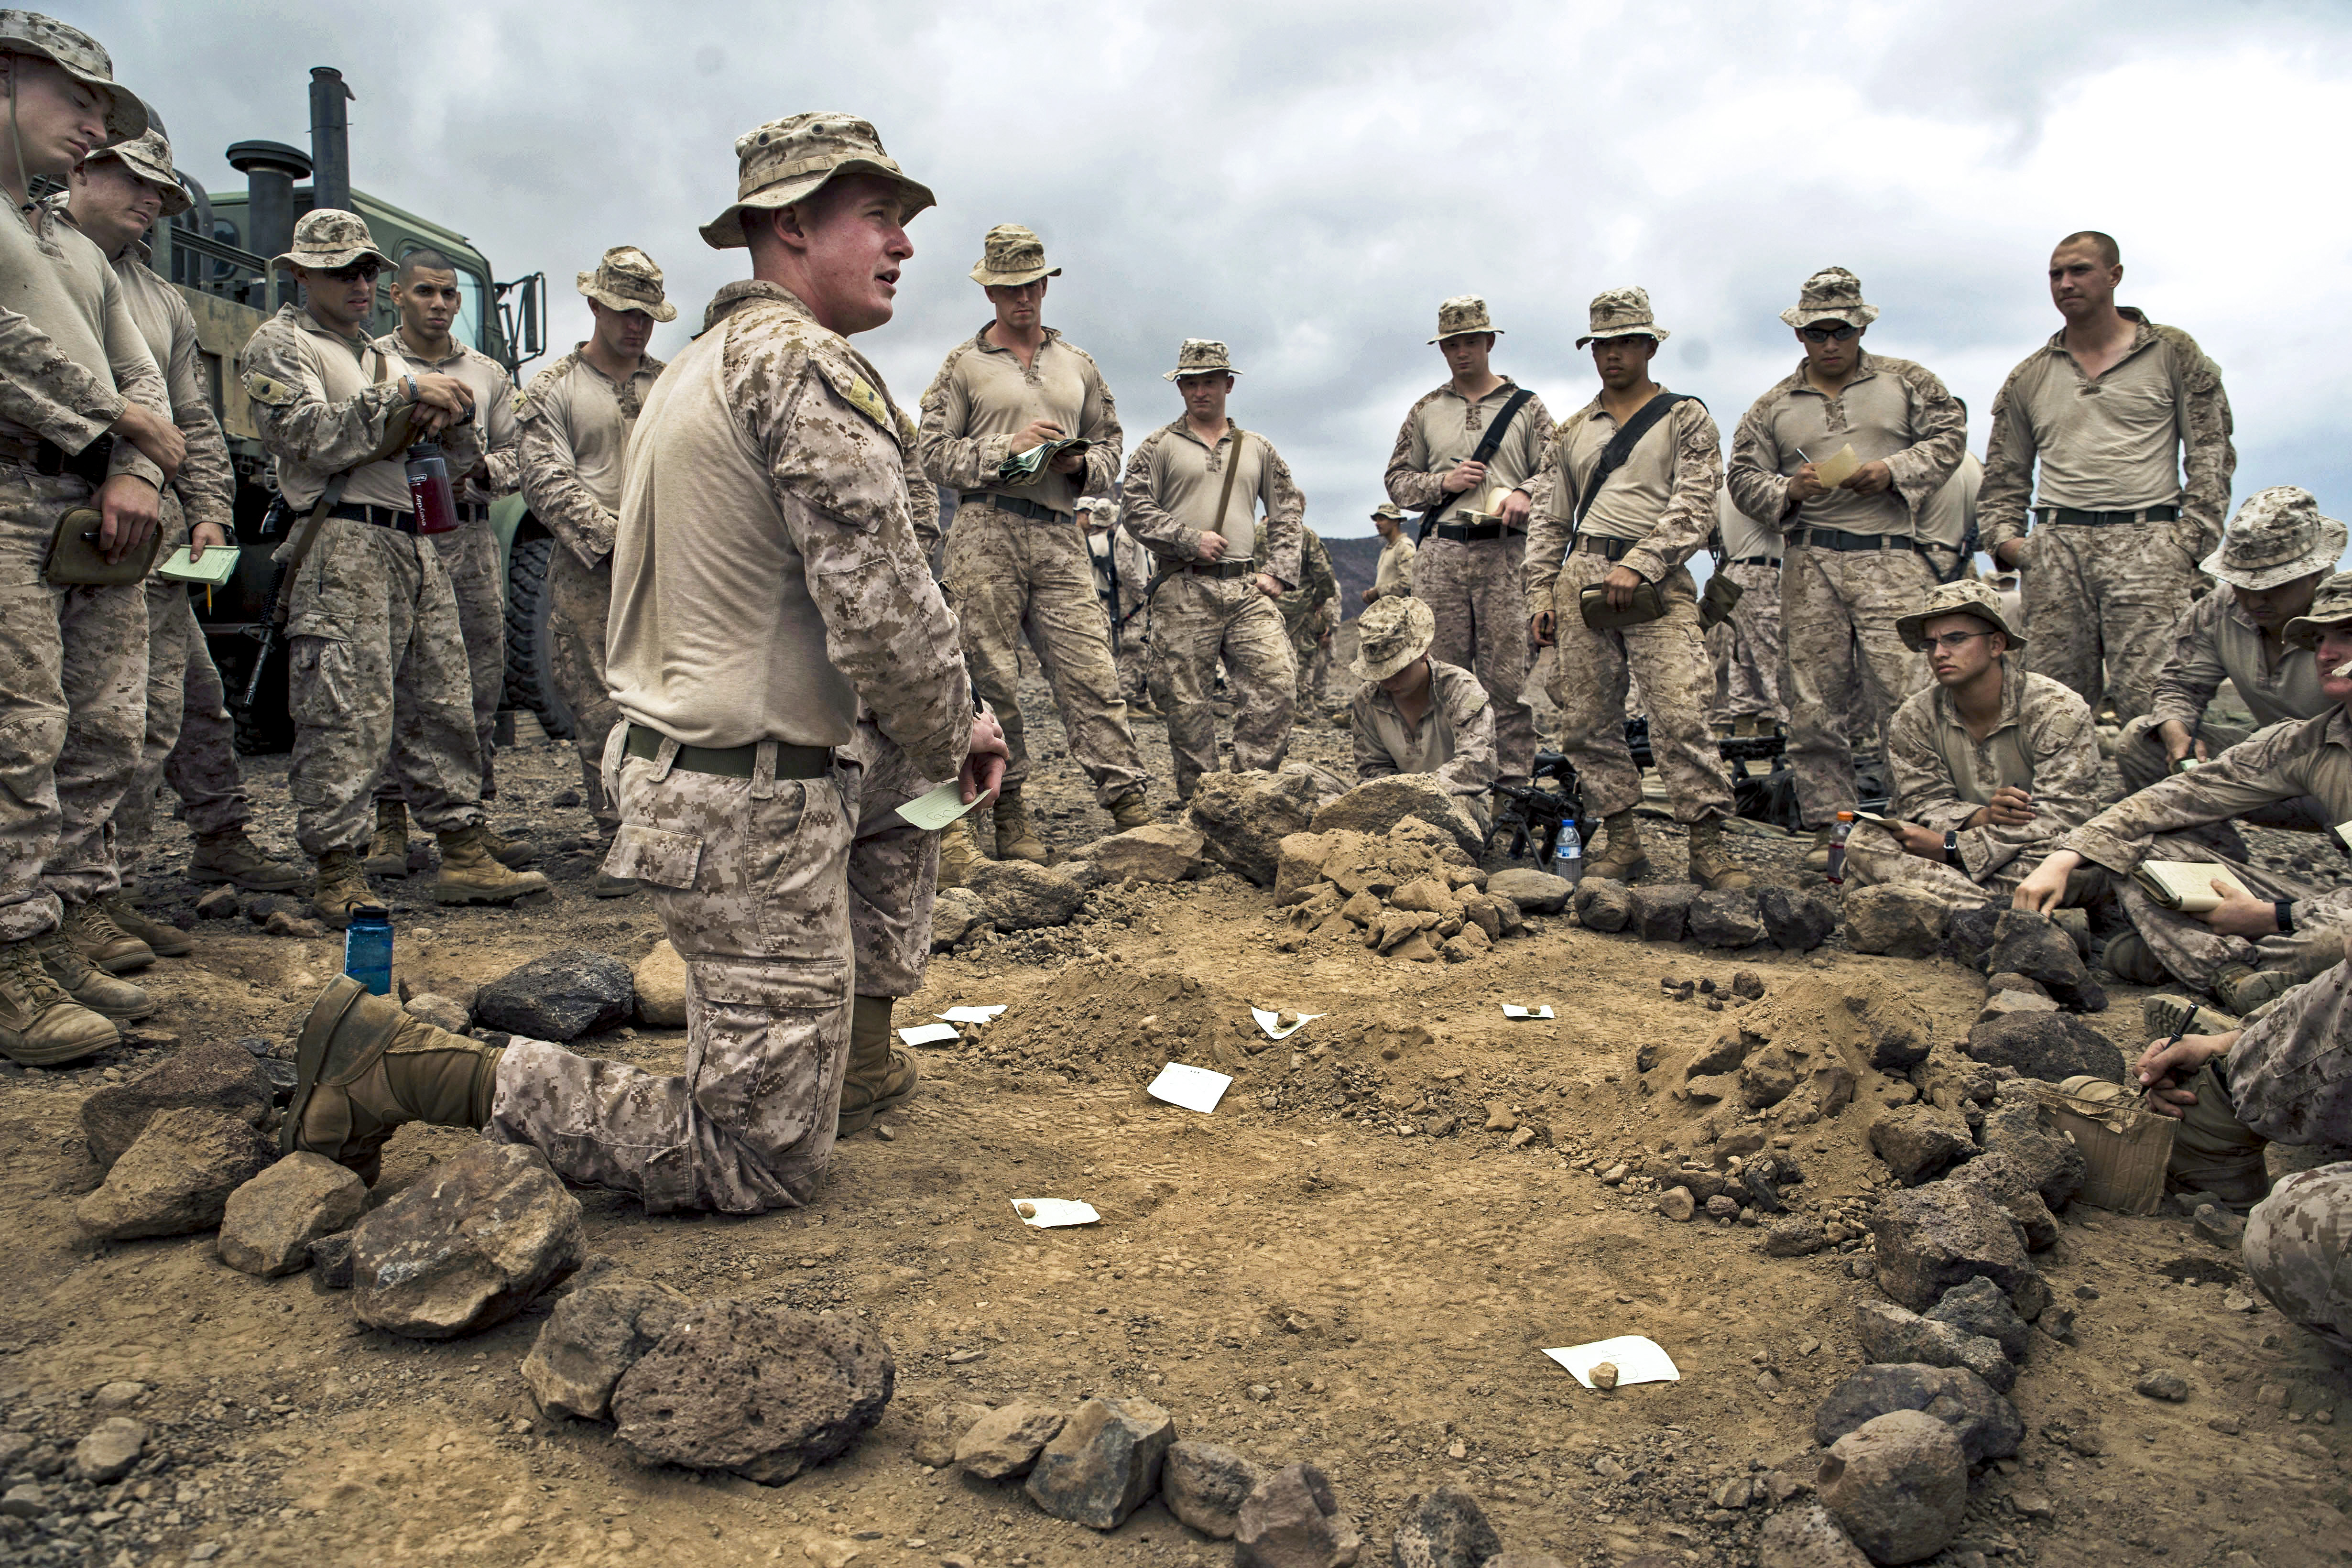 U.S. Marines with the 13th Marine Expeditionary Unit (MEU), Alpha Company 1/4, receive a briefing before a platoon assault exercise at Arta Range, Djibouti, Feb. 10, 2014. The 13th MEU is deployed with the Boxer Amphibious Ready Group as a theater reserve and crisis response force throughout the U.S. 5th Fleet area of responsibility.(U.S. Air Force photo by Staff Sgt. Erik Cardenas/Released)